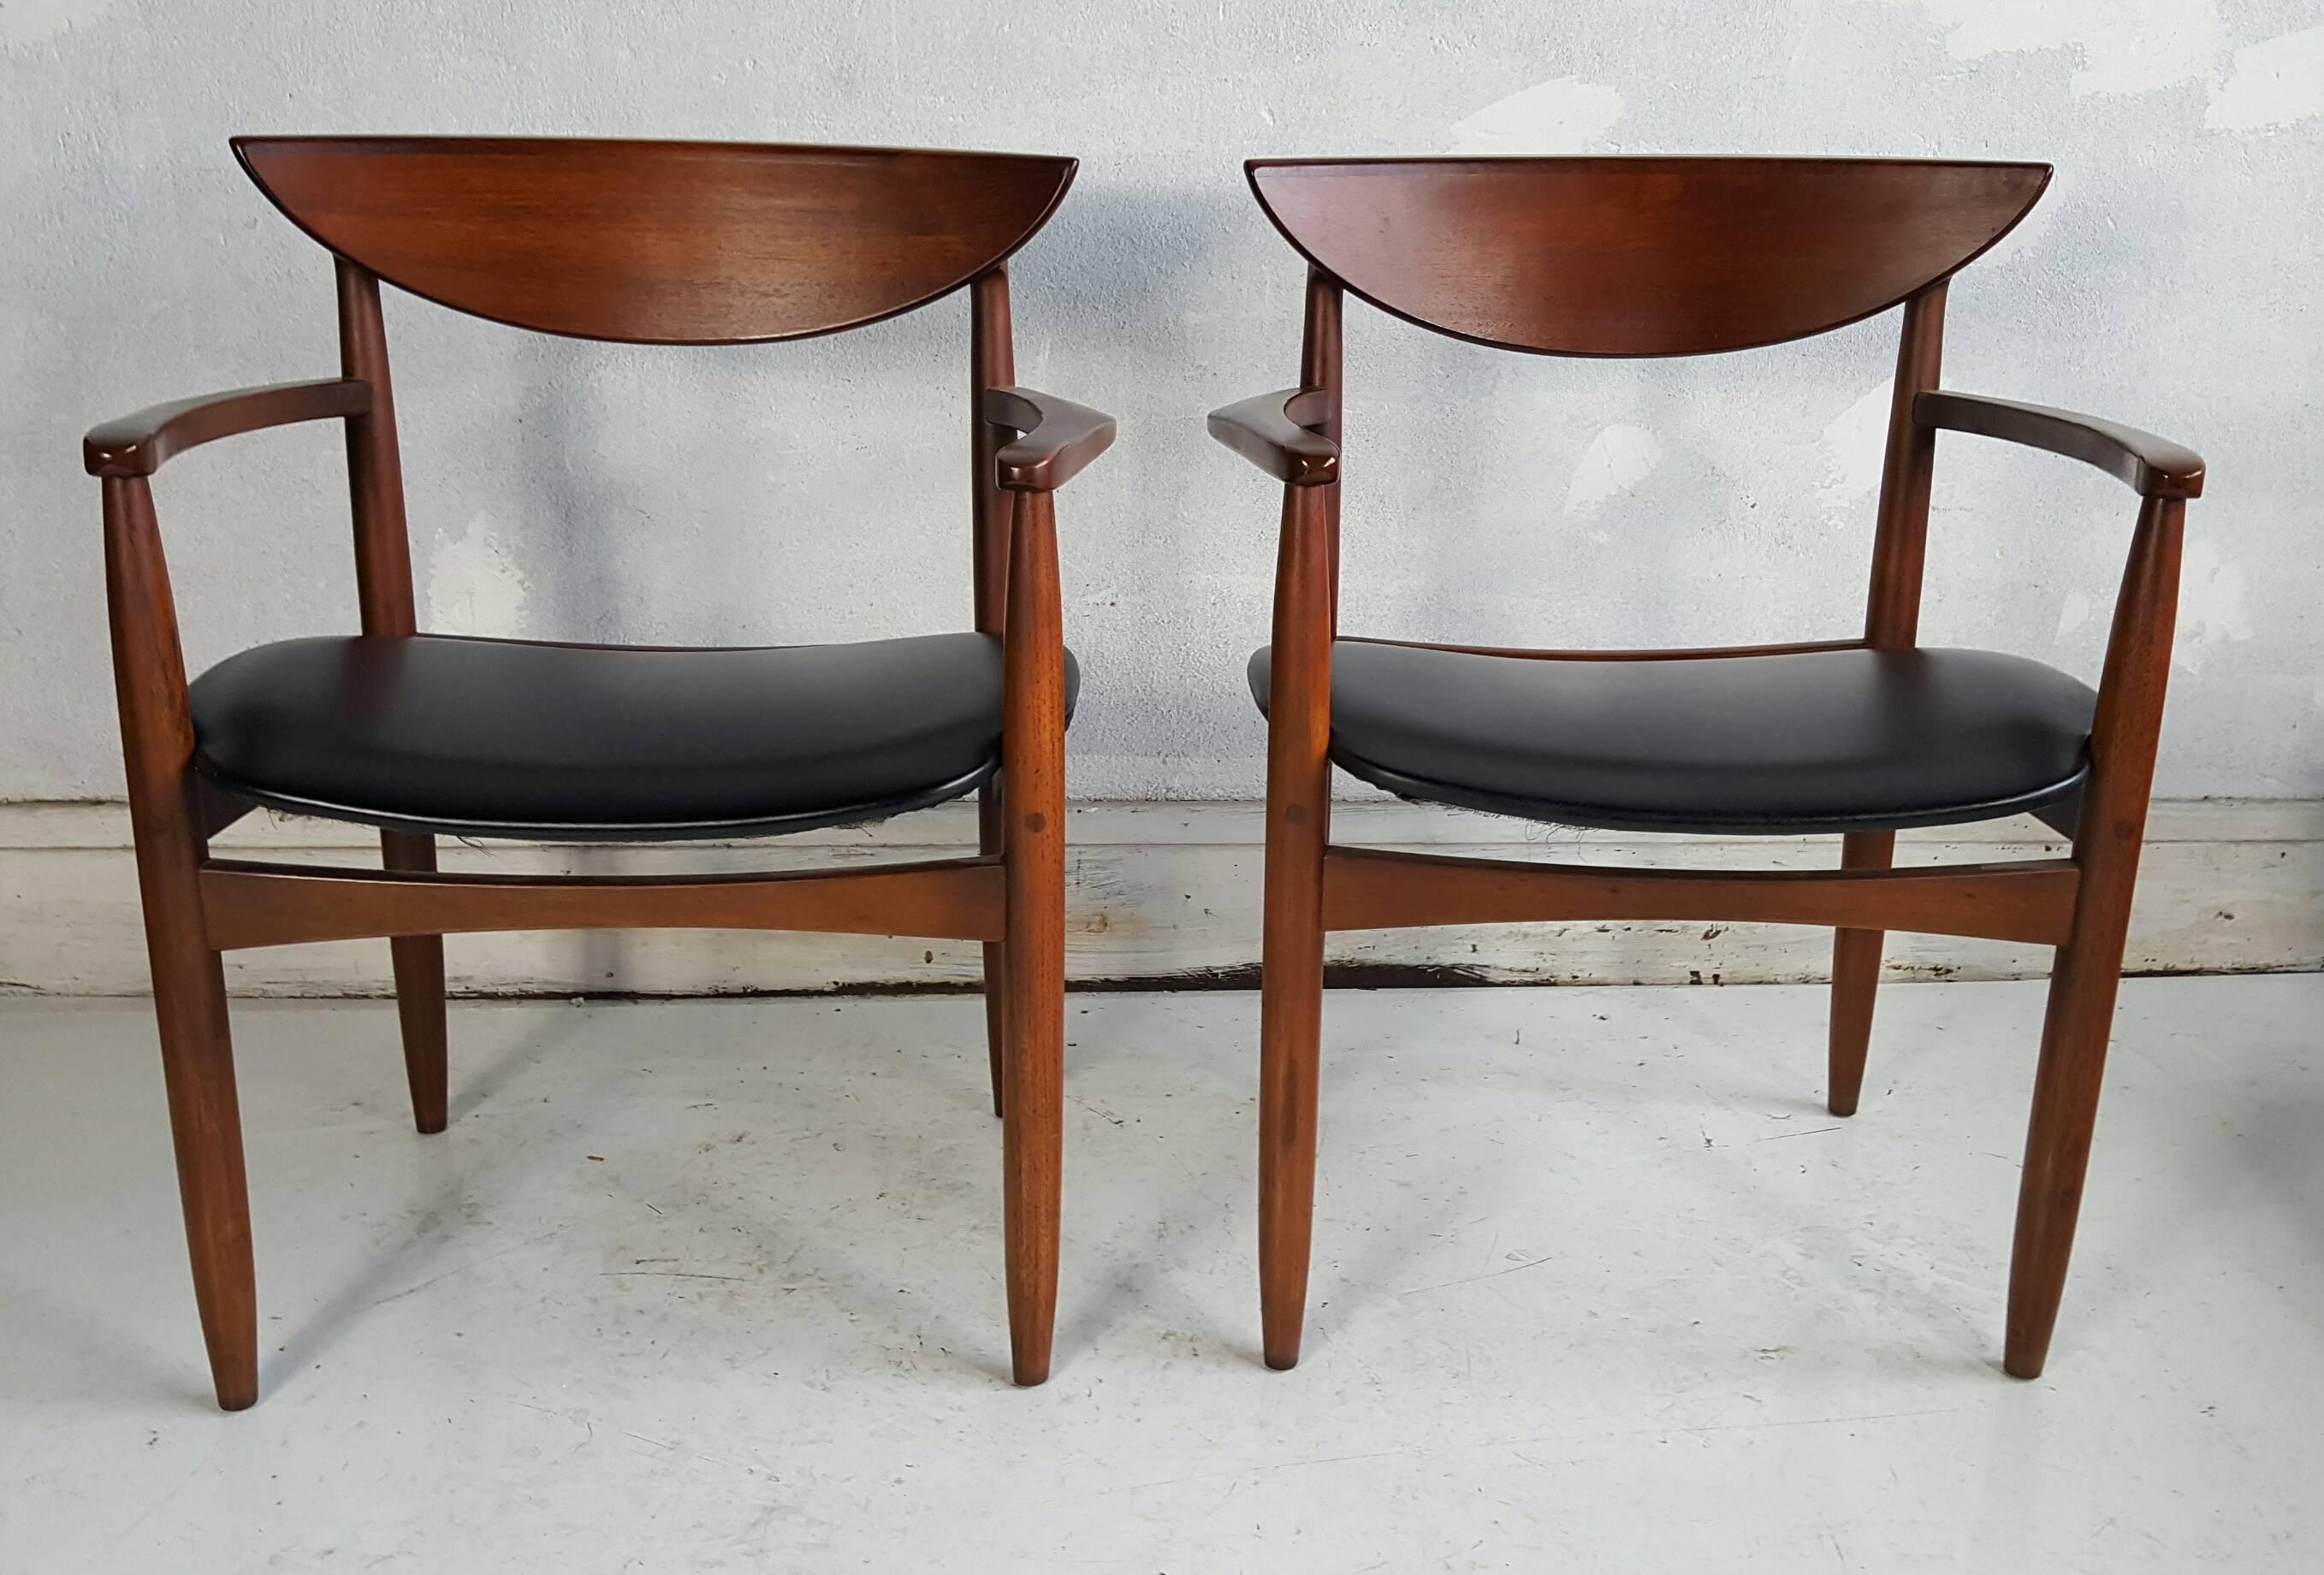 Classic set of six modernist dining chairs, solid walnut construction, manufactured by Lane Furniture Co. set consists of two armchairs and four side chairs, This is the 